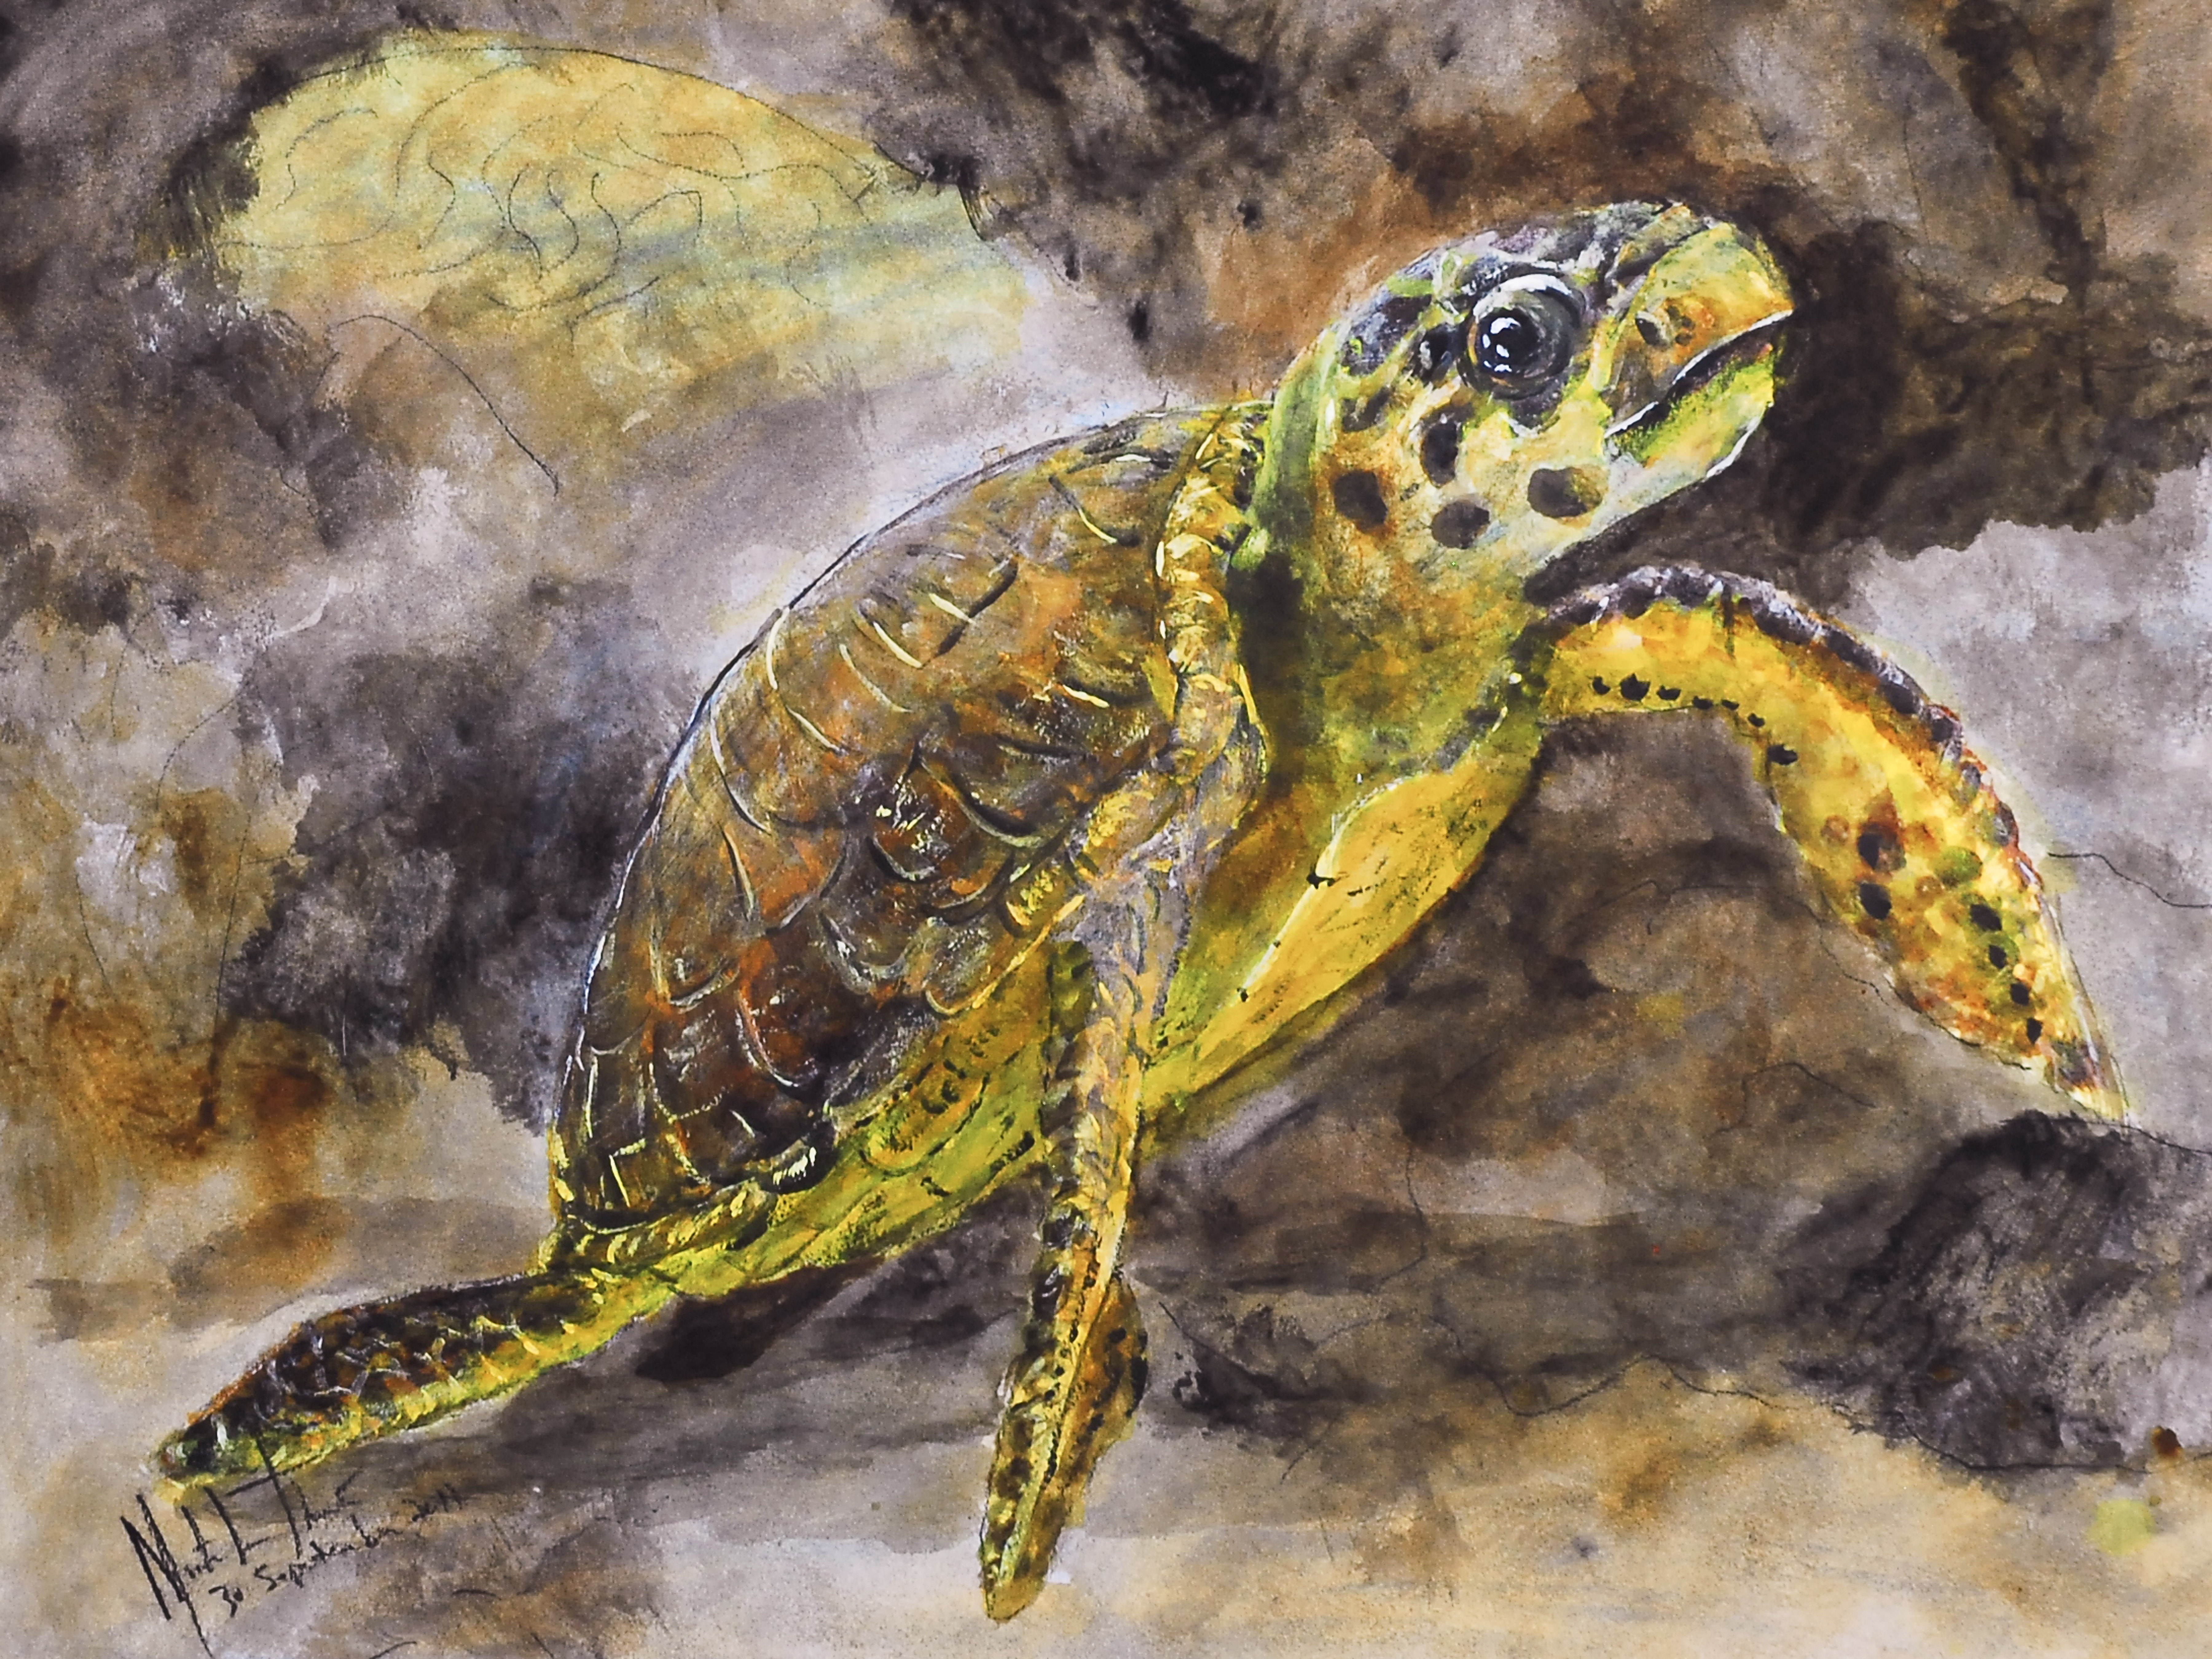 2011 Sea Turtle Scott Dock Reef 26x36 Arches watercolor paper with Acrylic washes. $1400 by Monte Thornton